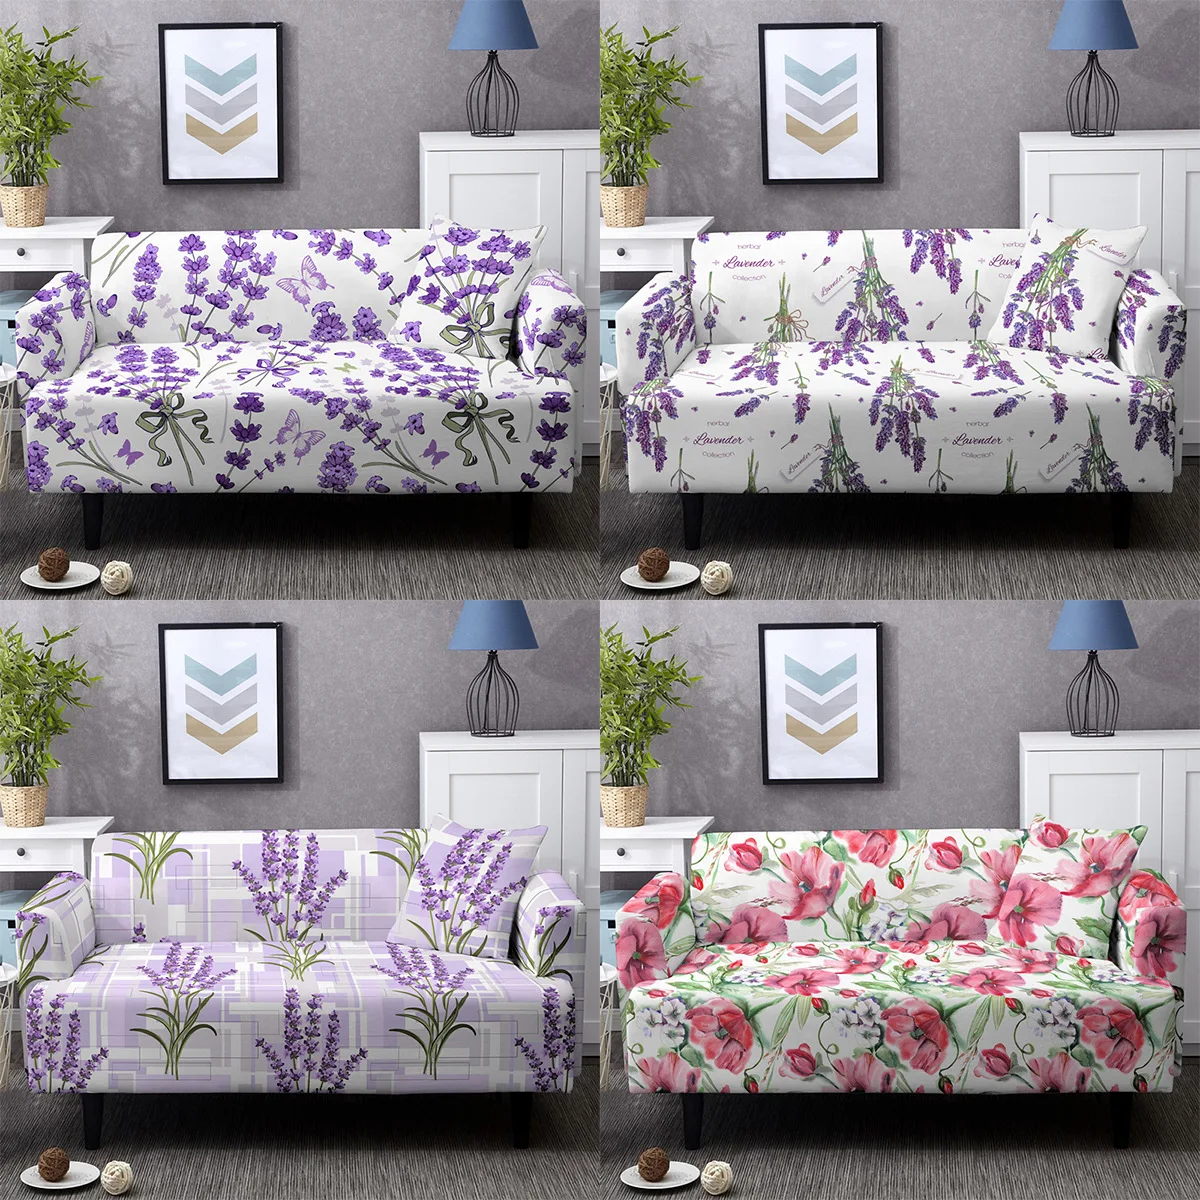 

Lavender Elastic Sofa Cover Modern Digital Printed All-Inclusive Loveseat Couch Cover Stretch Sectional Slipcover 1/2/3/4 Seater